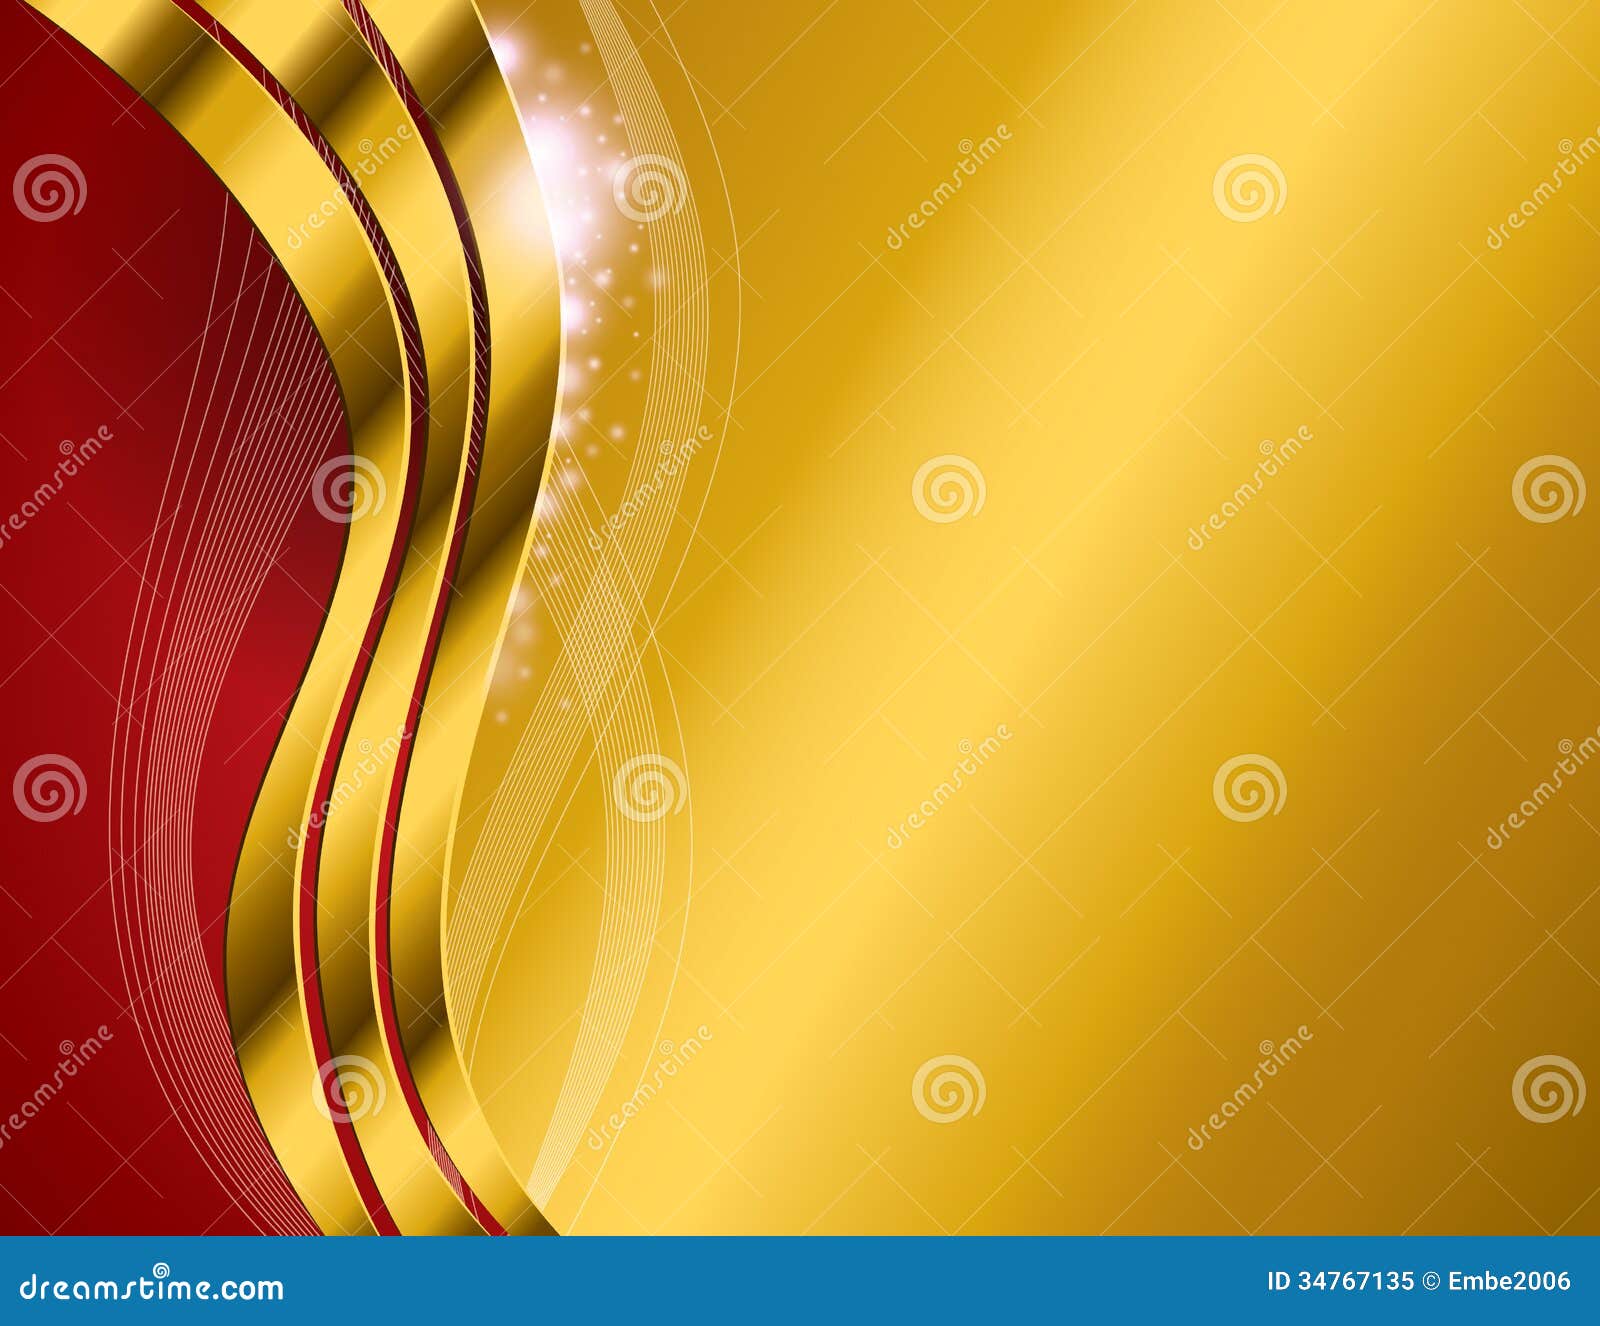 Gold Abstract Background Vector Art Icons and Graphics for Free Download